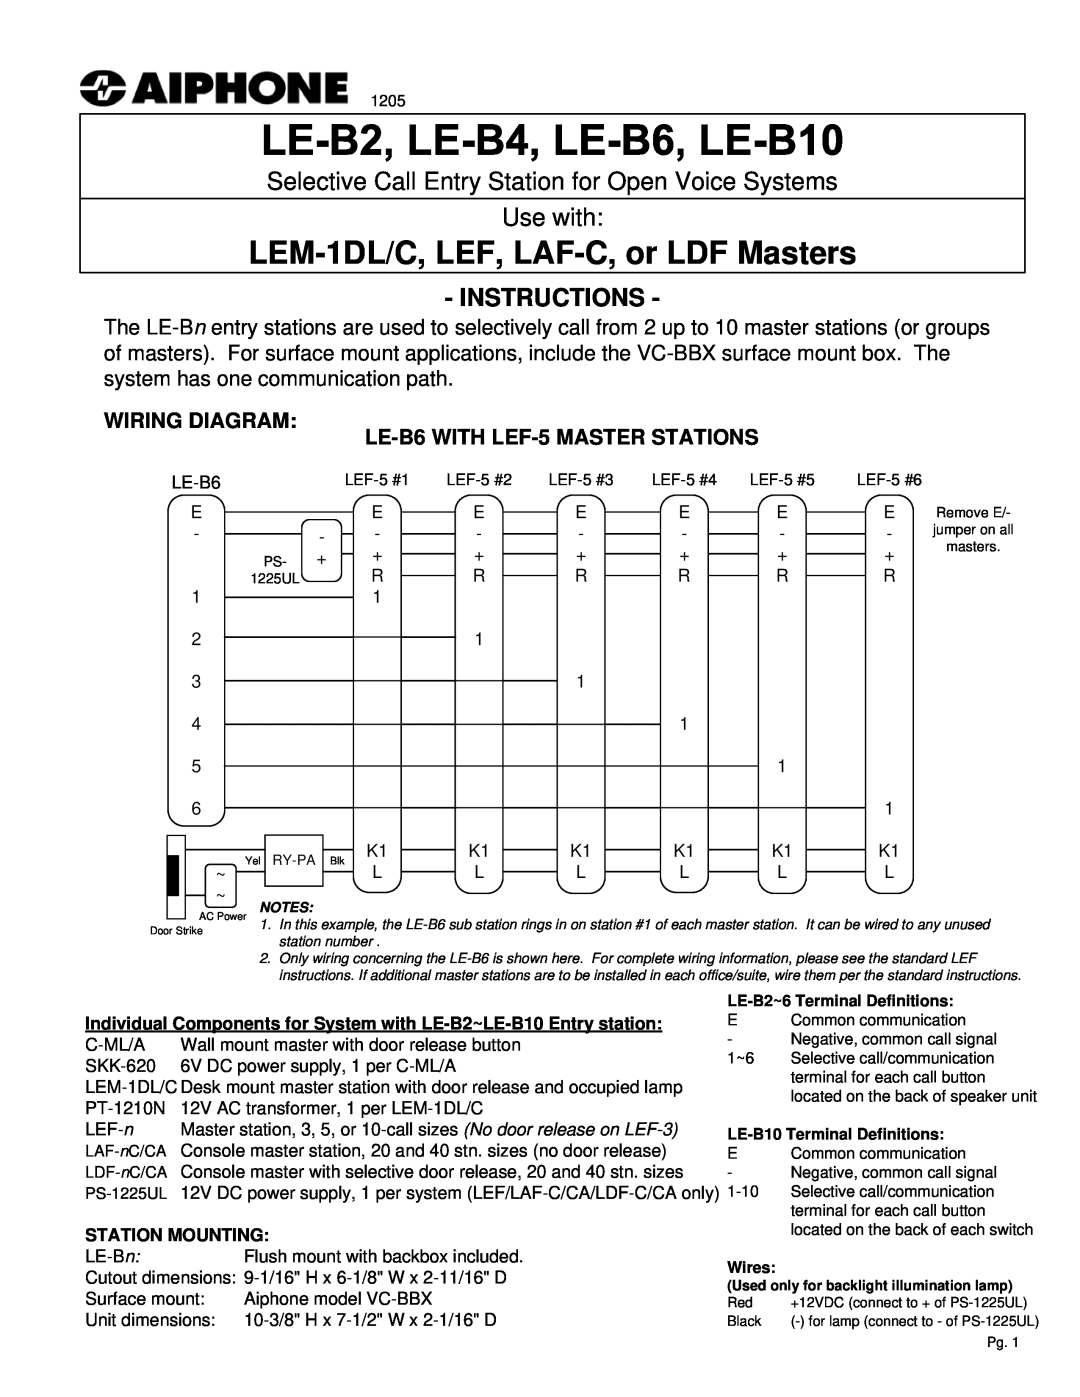 Aiphone dimensions WIRING DIAGRAM LE-B6 WITH LEF-5 MASTER STATIONS, LEM-1DL/C, LEF, LAF-C, or LDF Masters, Instructions 